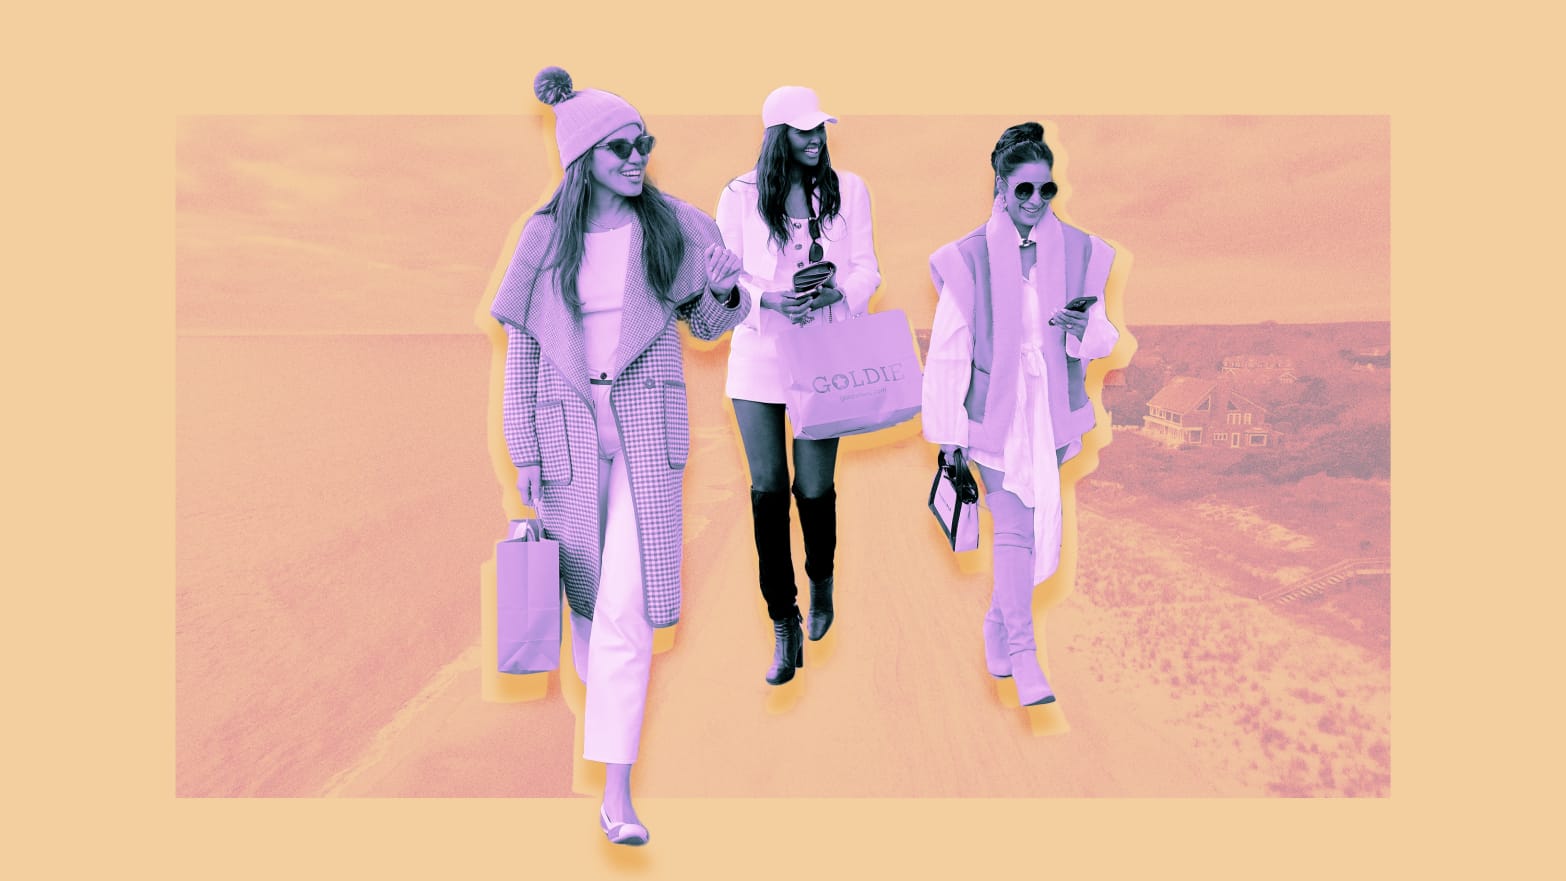 A photo illustration of Brynn Whitfield, Ubah Hassan, Jessel Taank on RHONY and an image of the Hamptons shoreline.